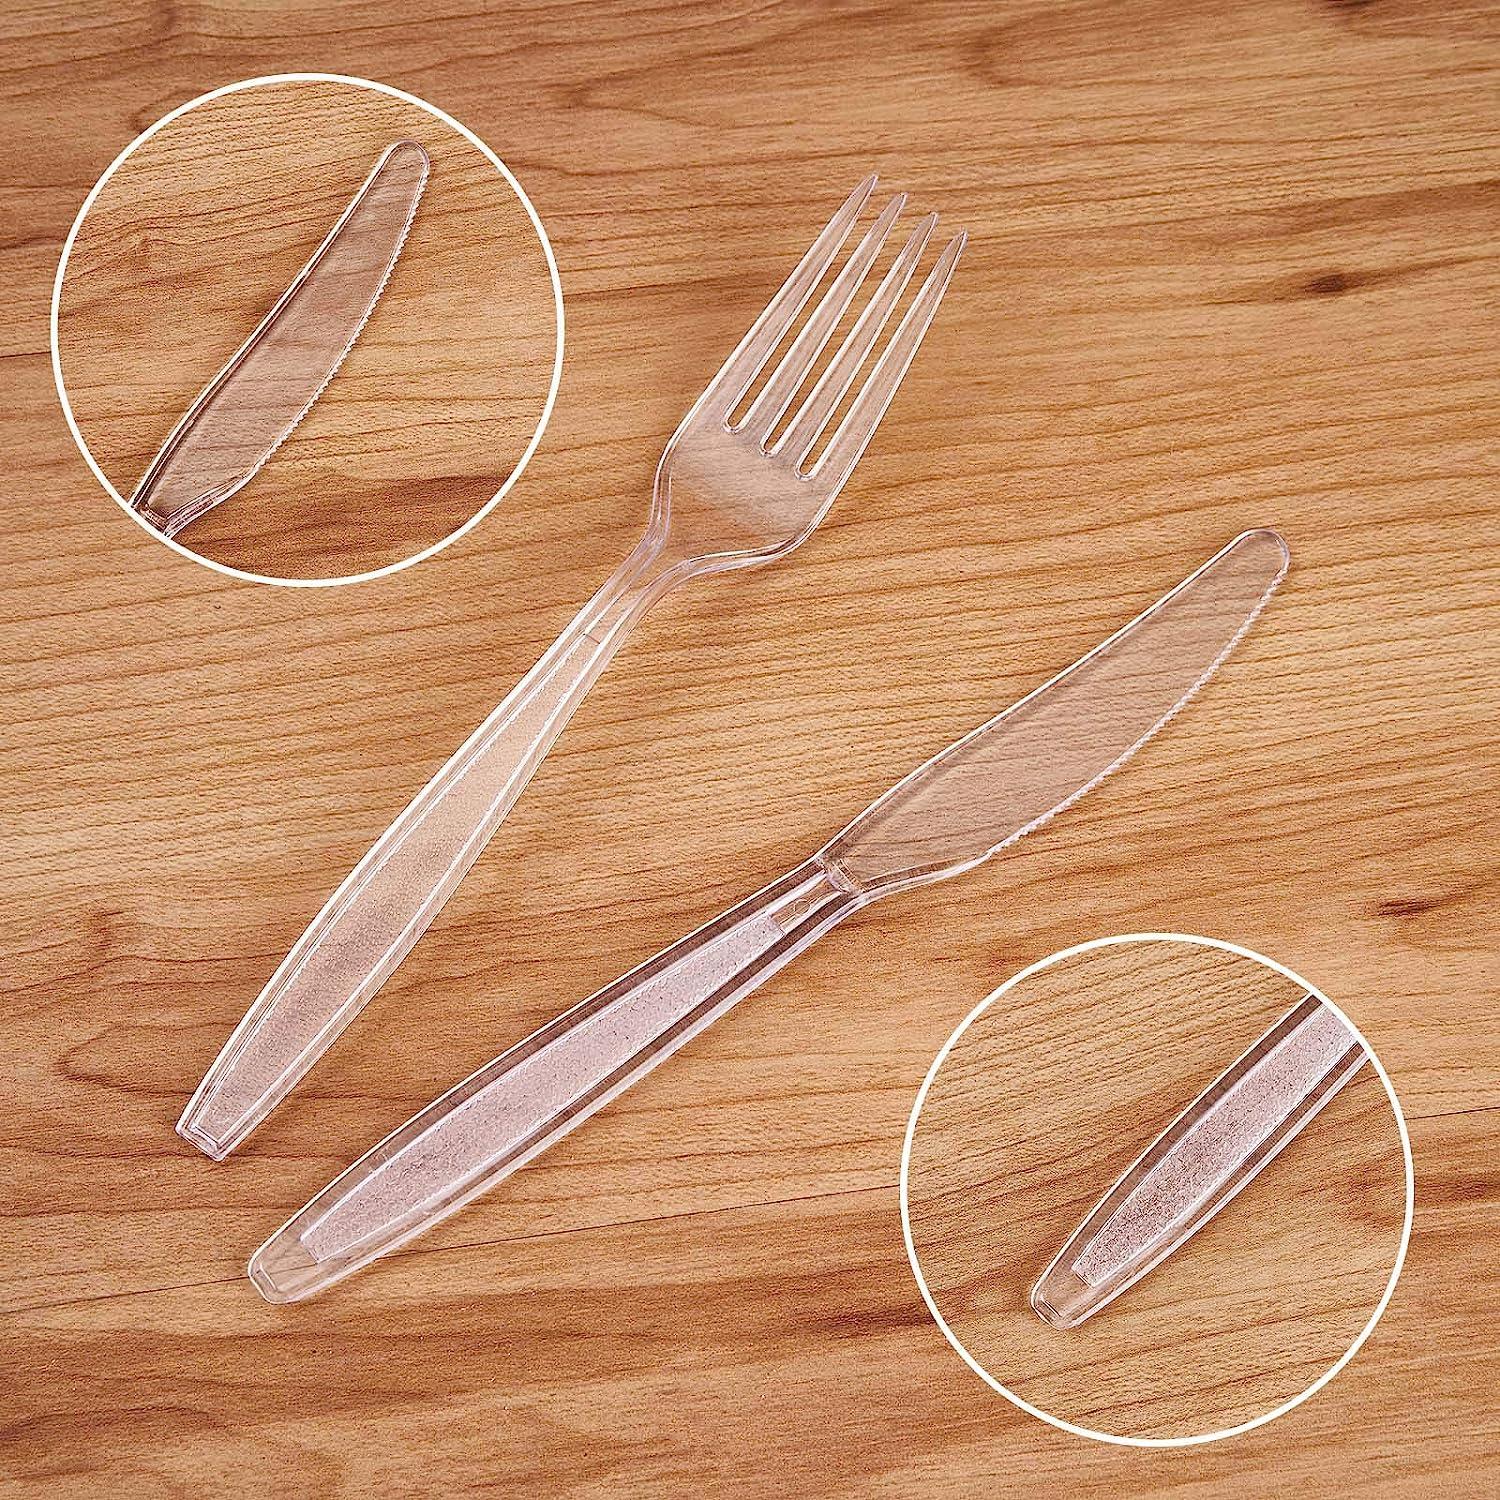  200 Count Clear Plastic Knives, Heavy Weight Disposable  Spoons Cutlery Plastic Utensils, Clear Plastic Silverware Bulk